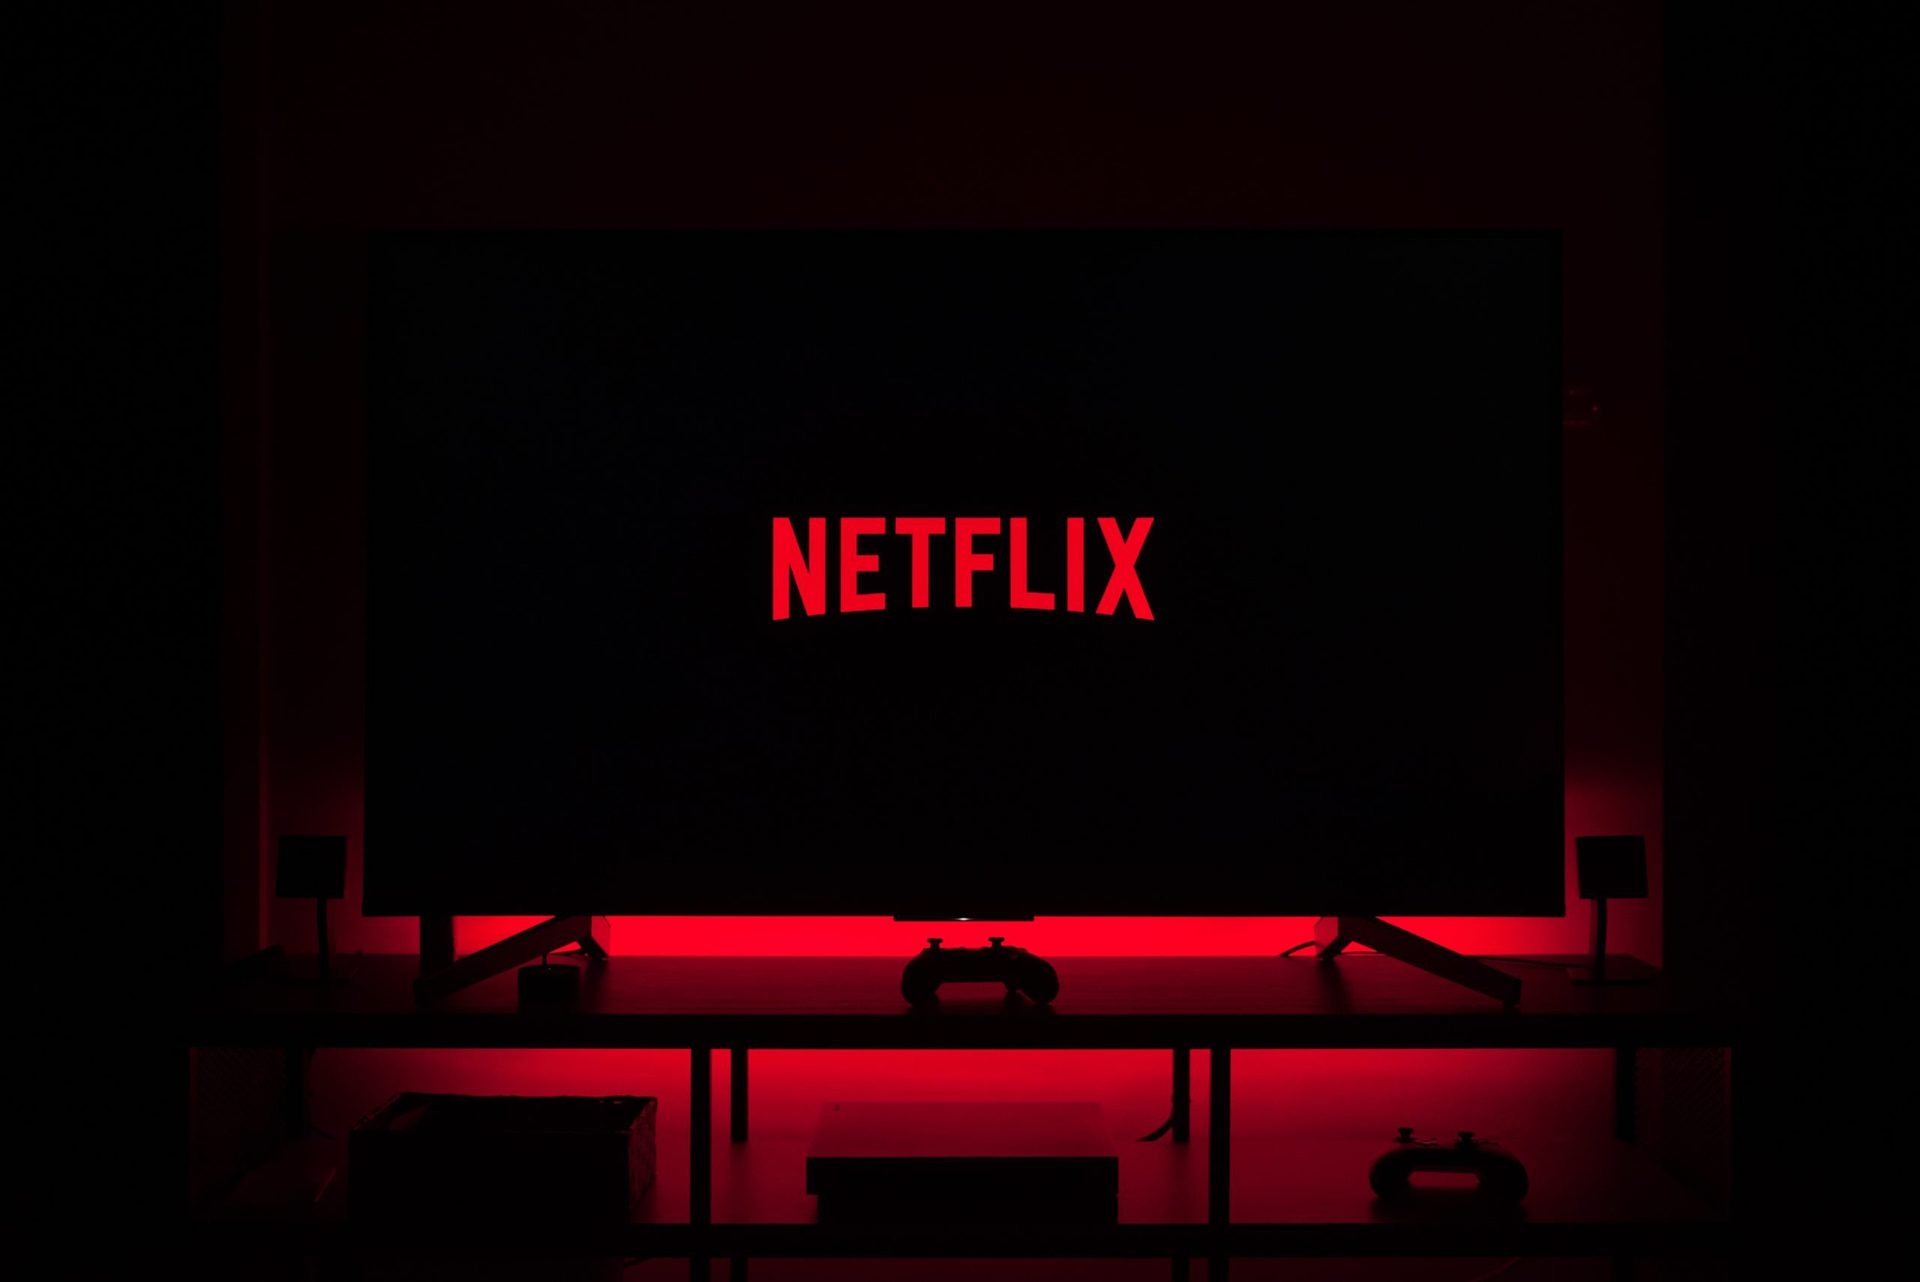 How to sign out of Netflix on TV?